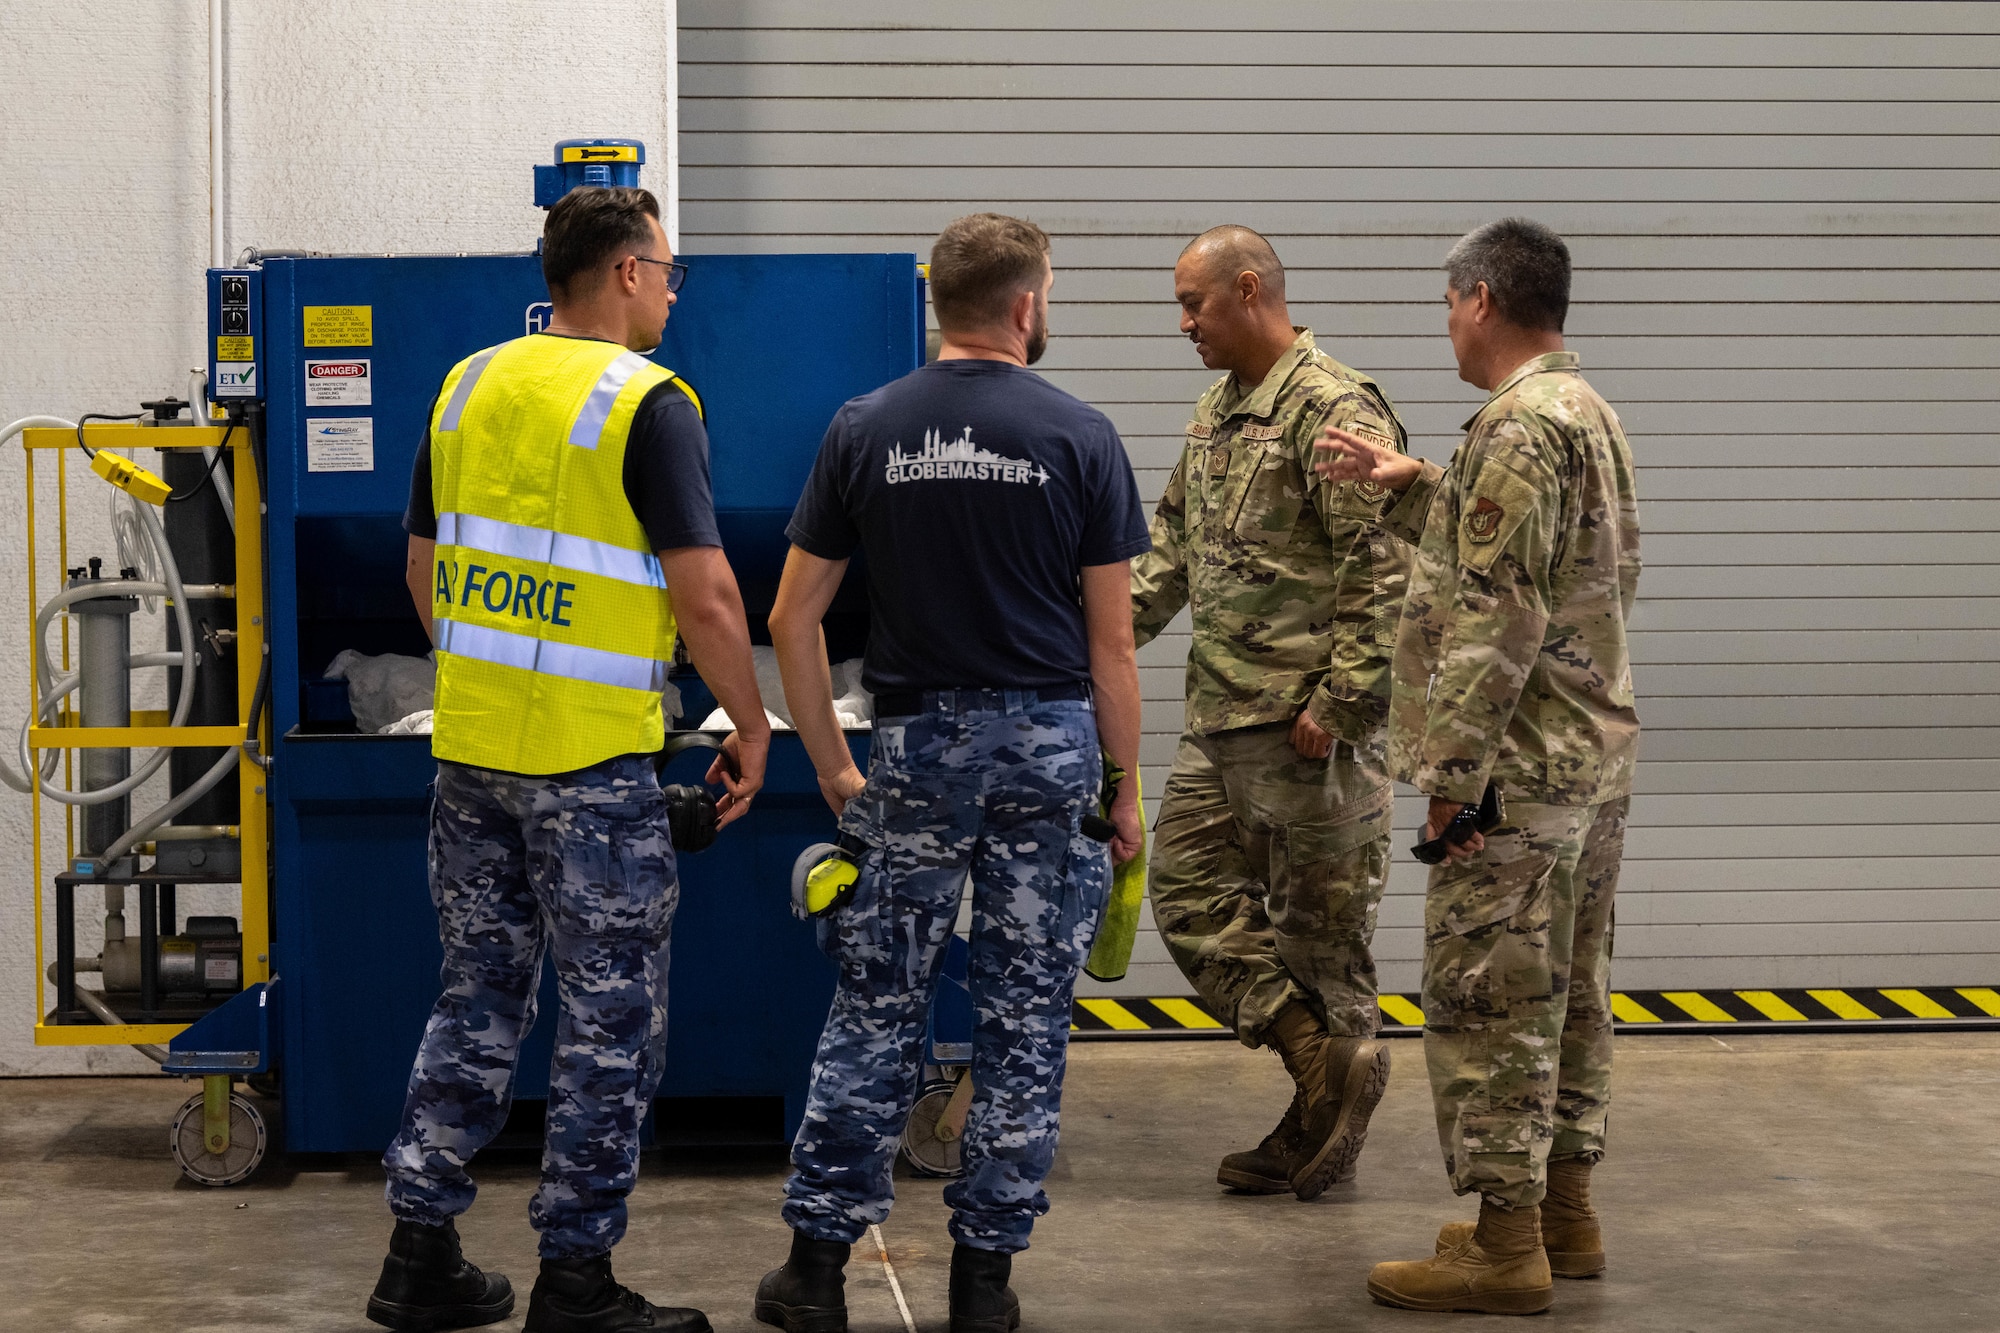 Two Royal Australian Air Force members talk to two U.S. Airmen about a Machine during a tour of the facility on Joint Base Pearl Harbor Hickam.